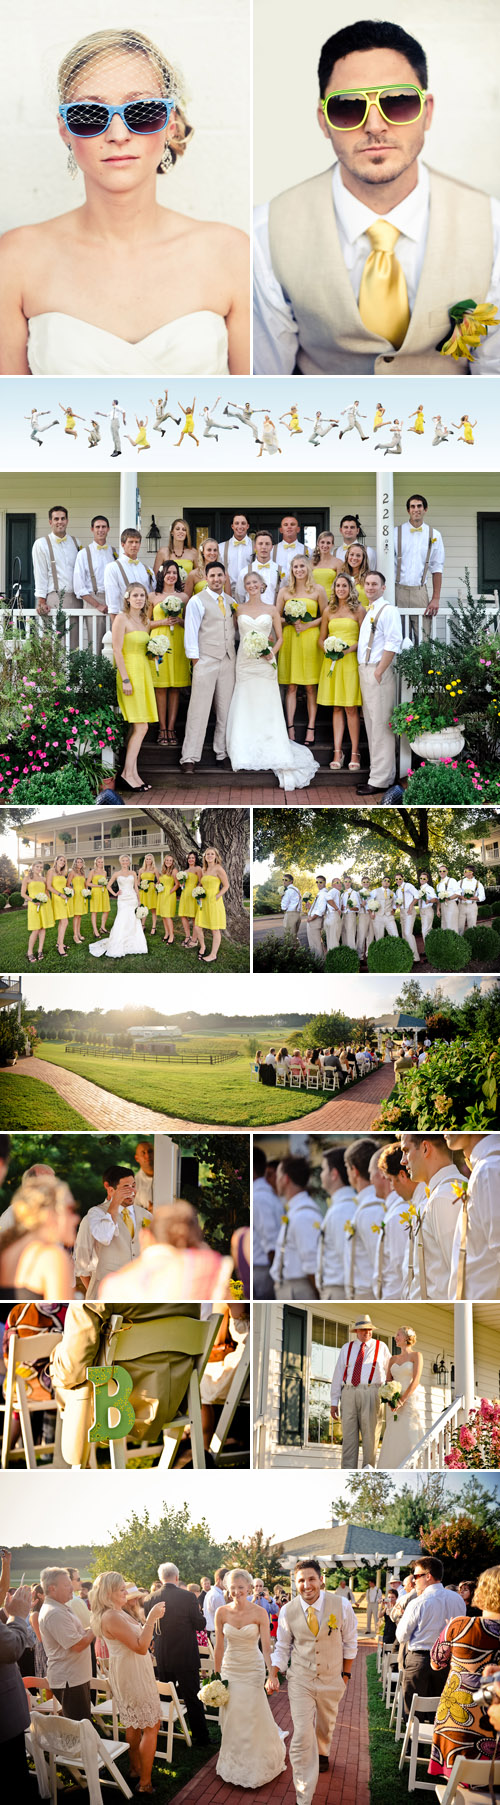 casual outdoor Virginia real wedding at the Rock Hill Plantation House, photos by Rebekah J. Murray Photography